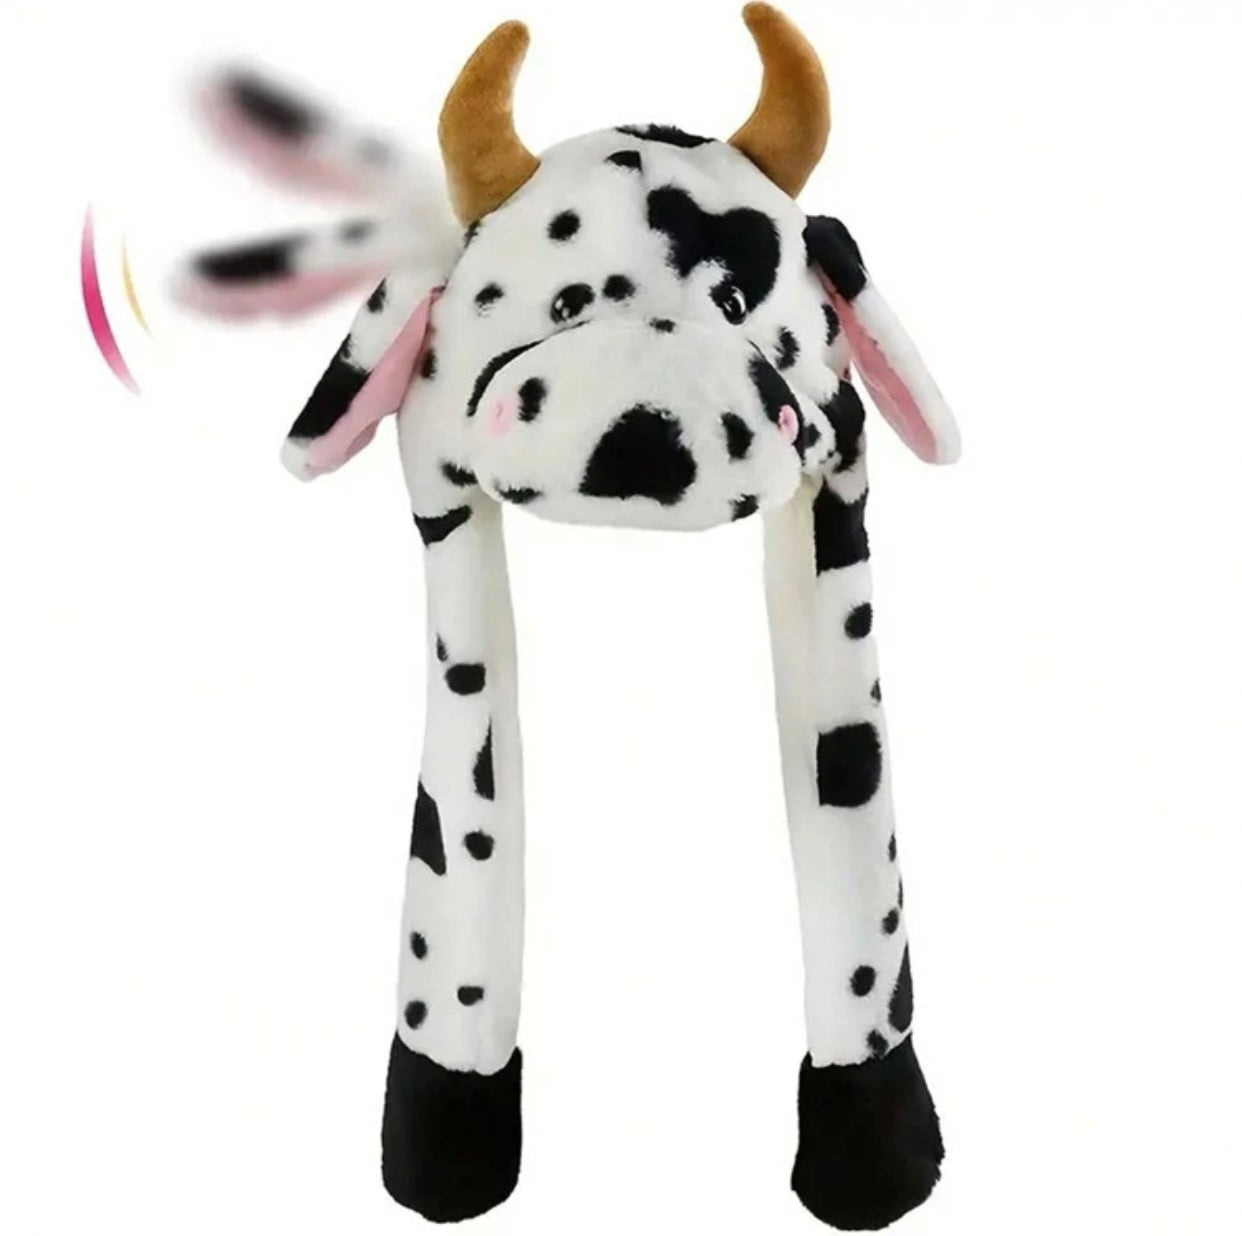 Kids Novelty Hat, Moving Ears, Flapping Ears, Cow